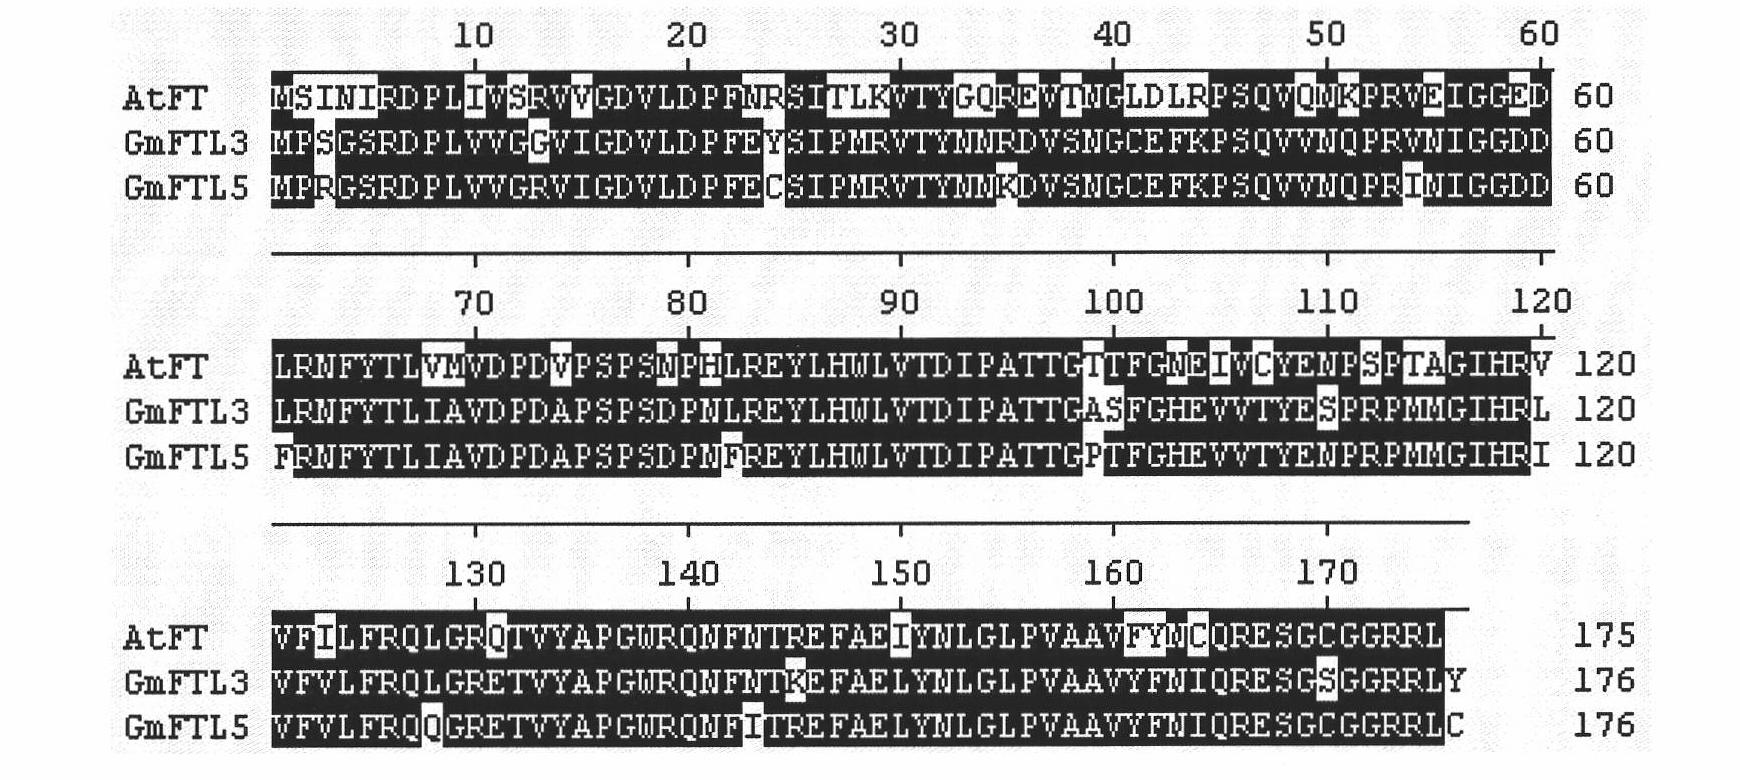 Soybean GmFTL3 protein and soybean GmFTL5 protein as well as applications thereof